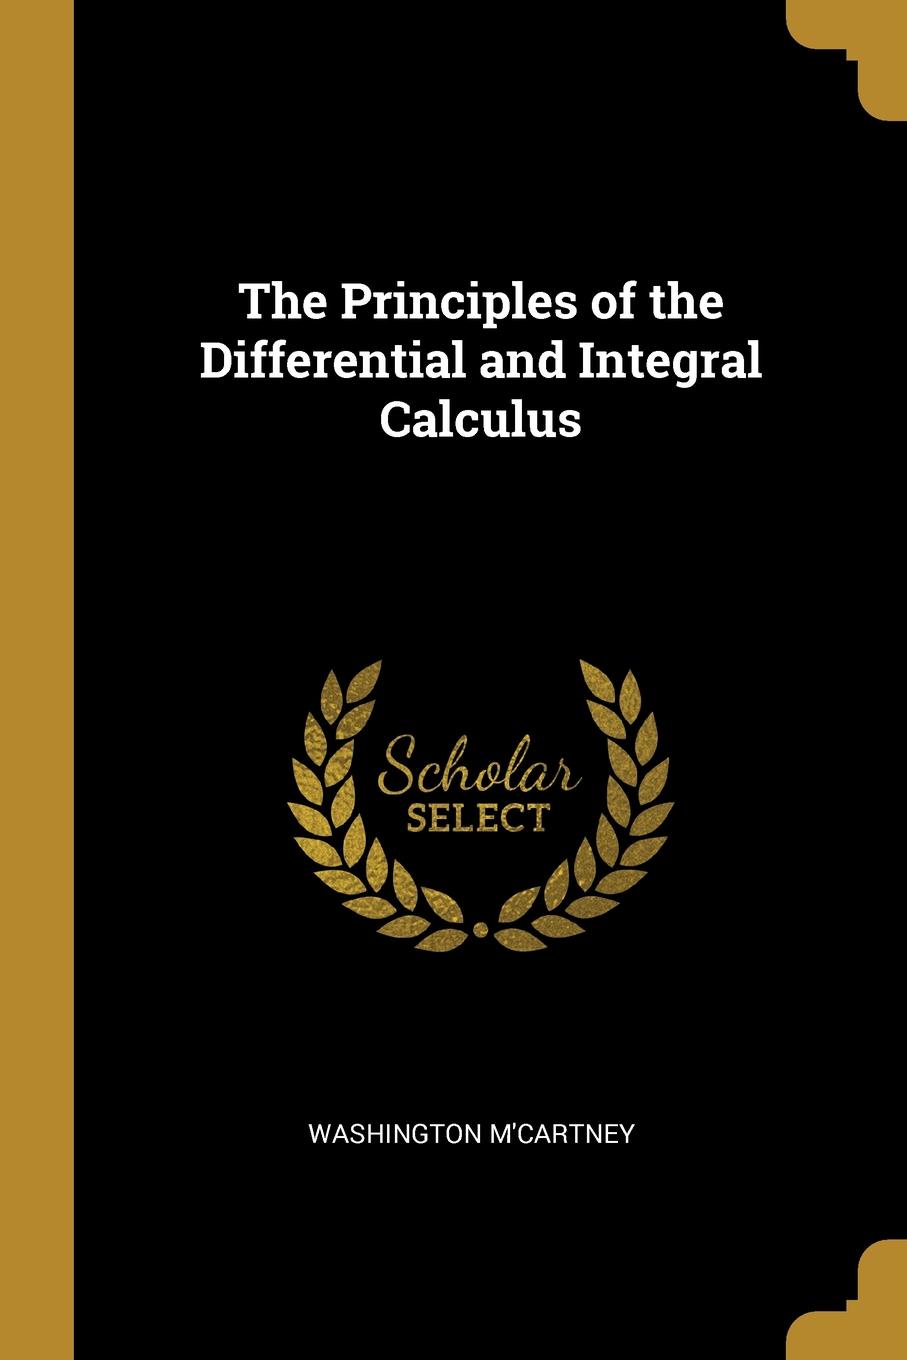 The Principles of the Differential and Integral Calculus